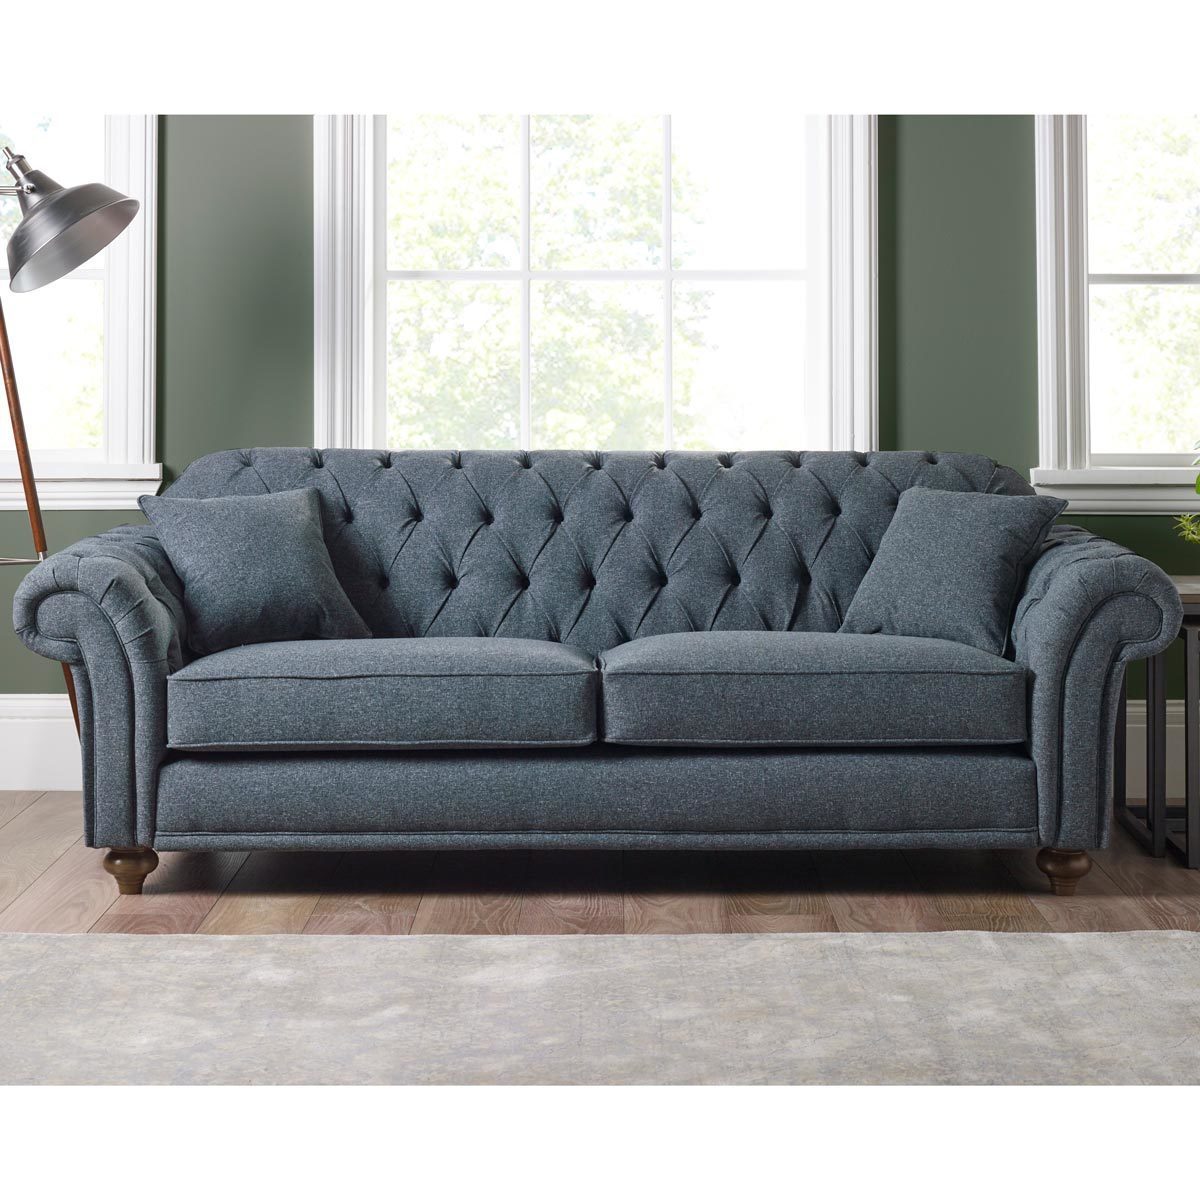 Bordeaux Button Back 3 Seater Fabric Sofa, Grey - Signature Retail Stores